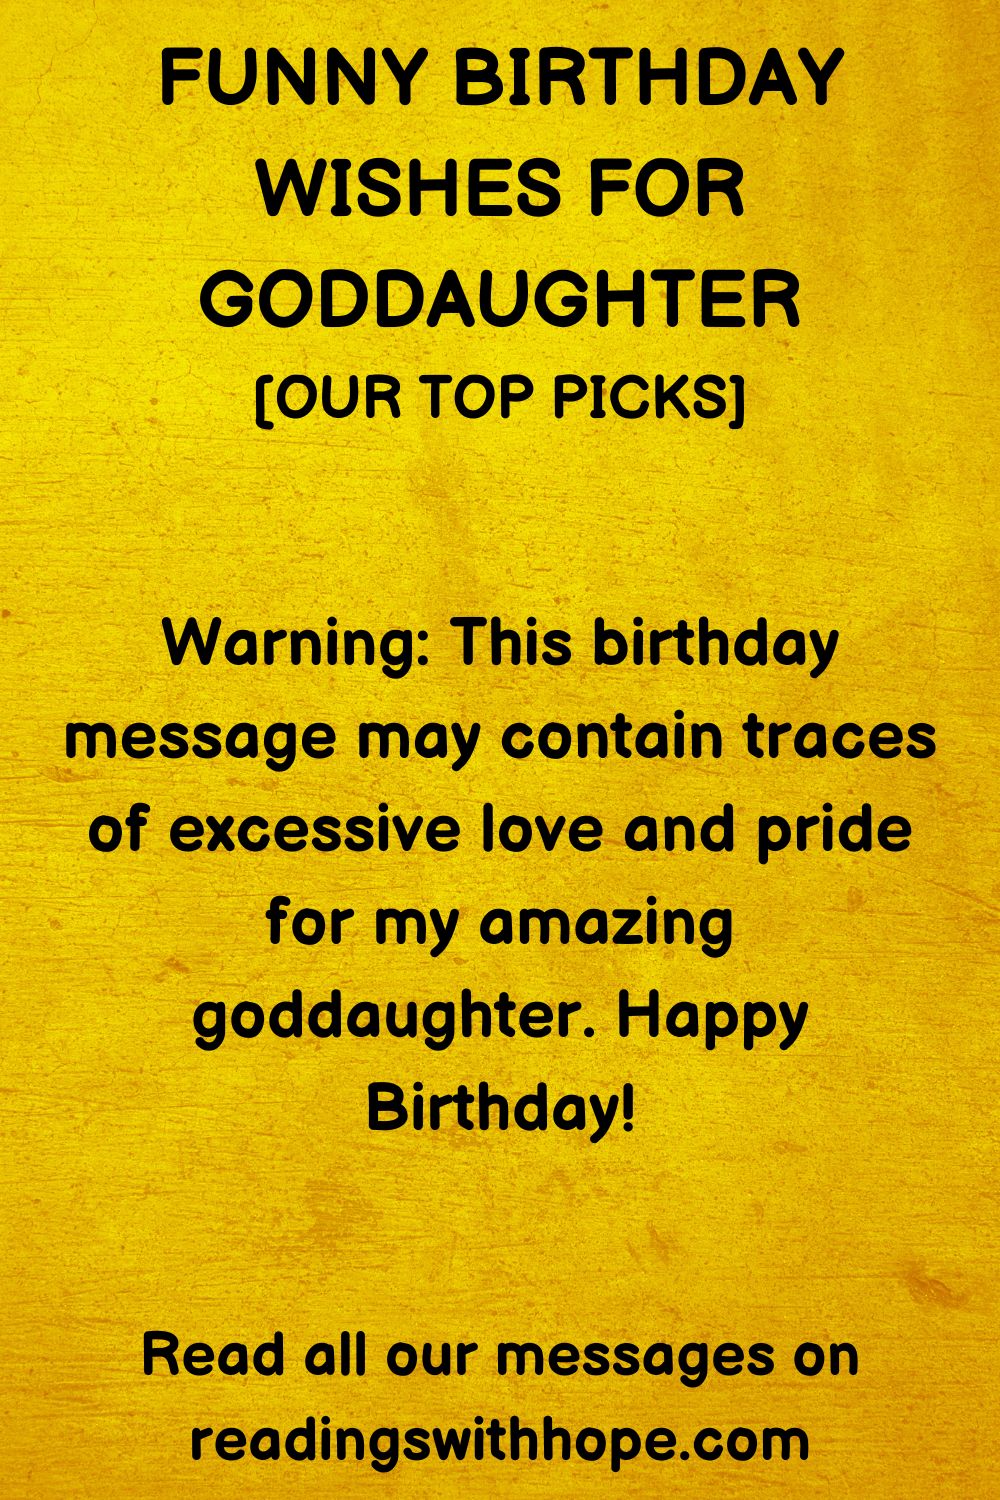 50 Happy Birthday Messages for Goddaughter